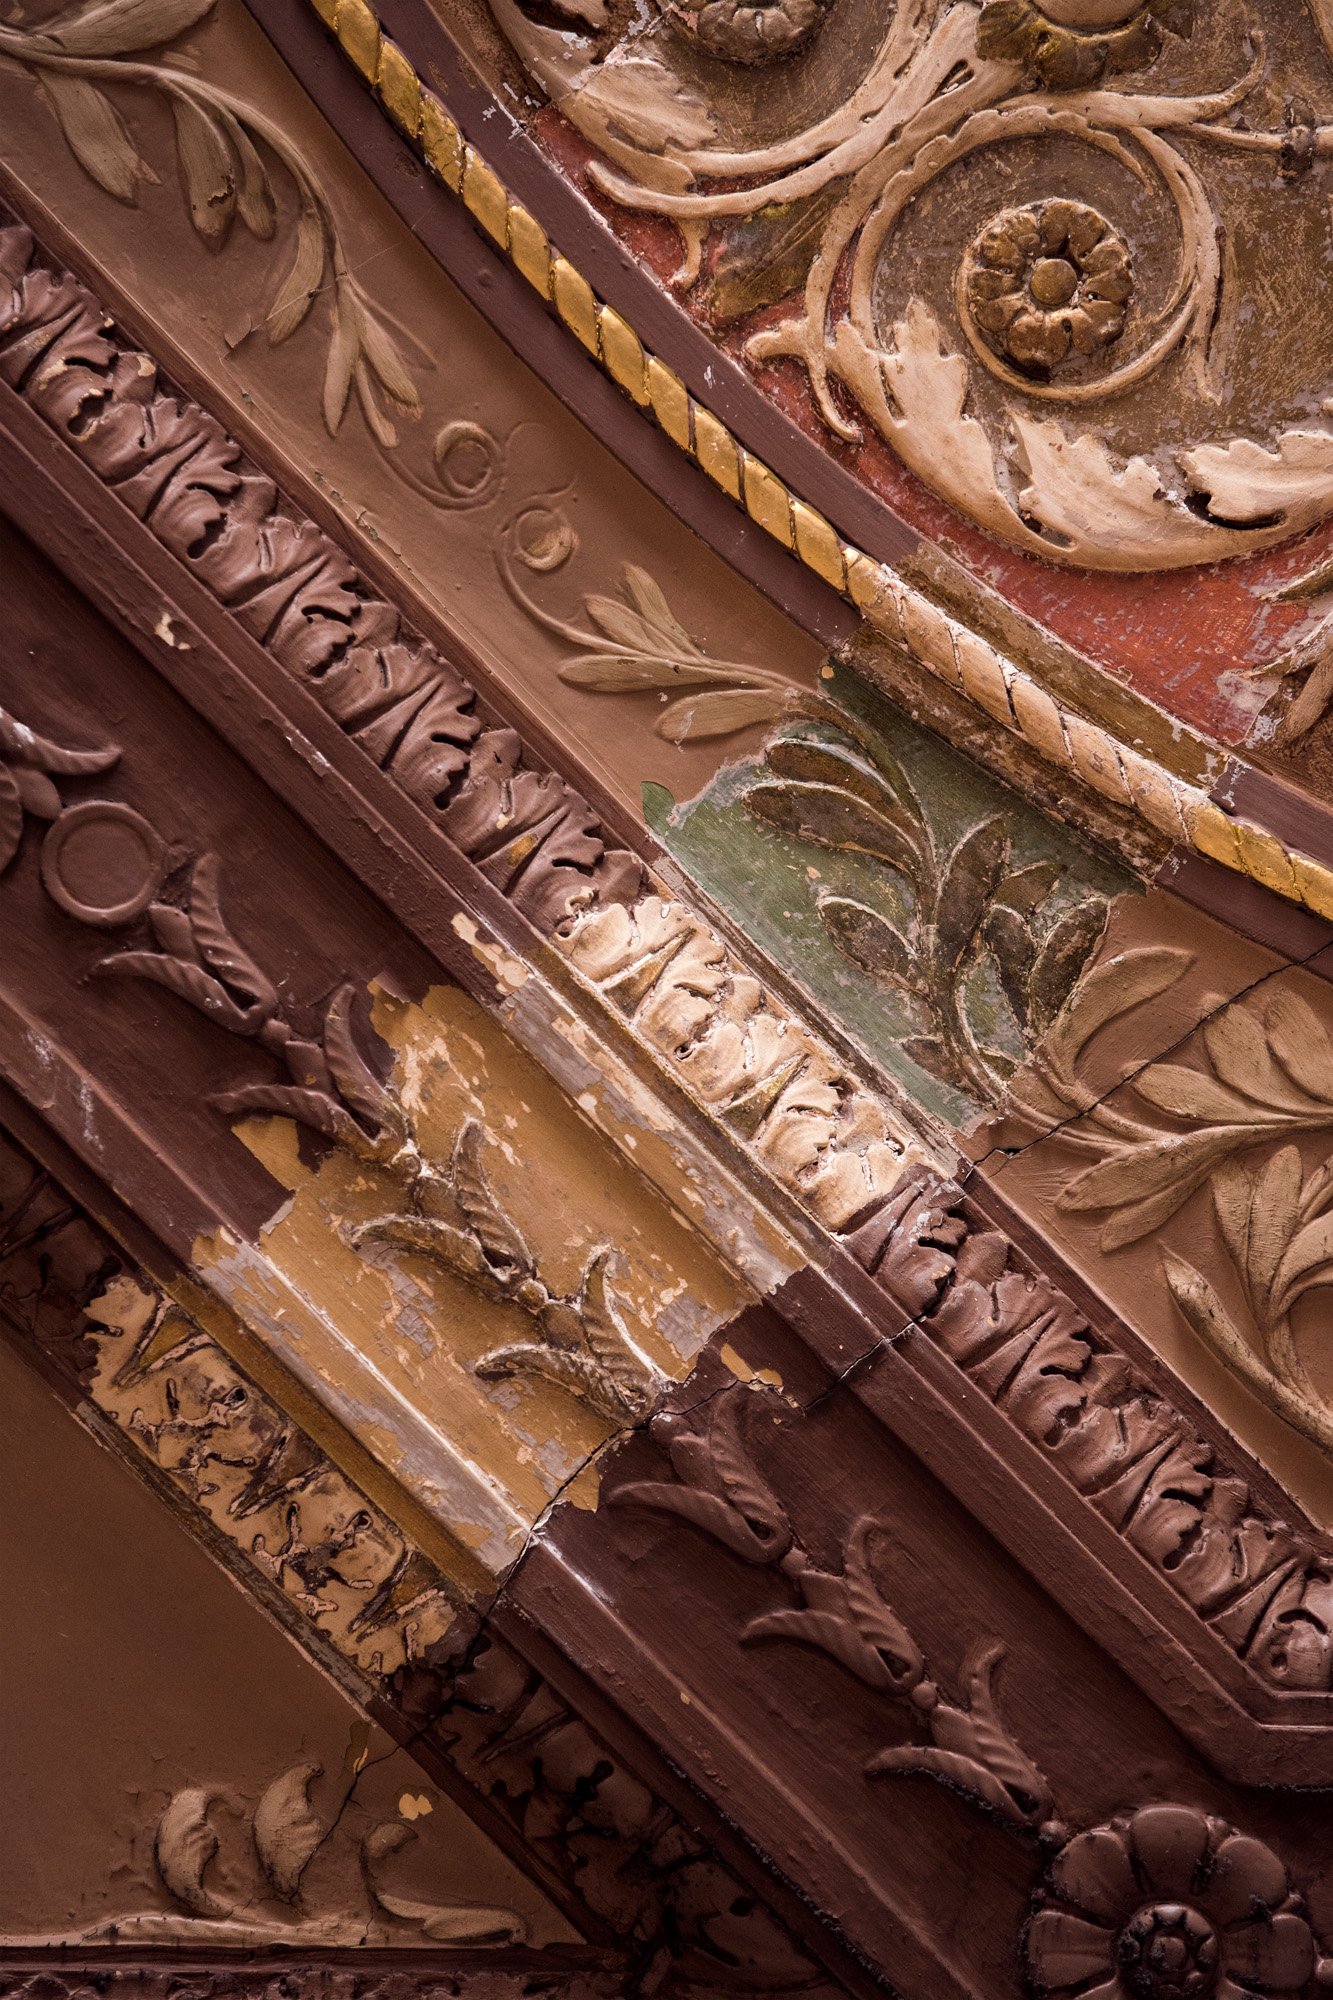 Forensic Researchers Took Paint Samples of the Waldorf Astoria to Aid in the Restoration